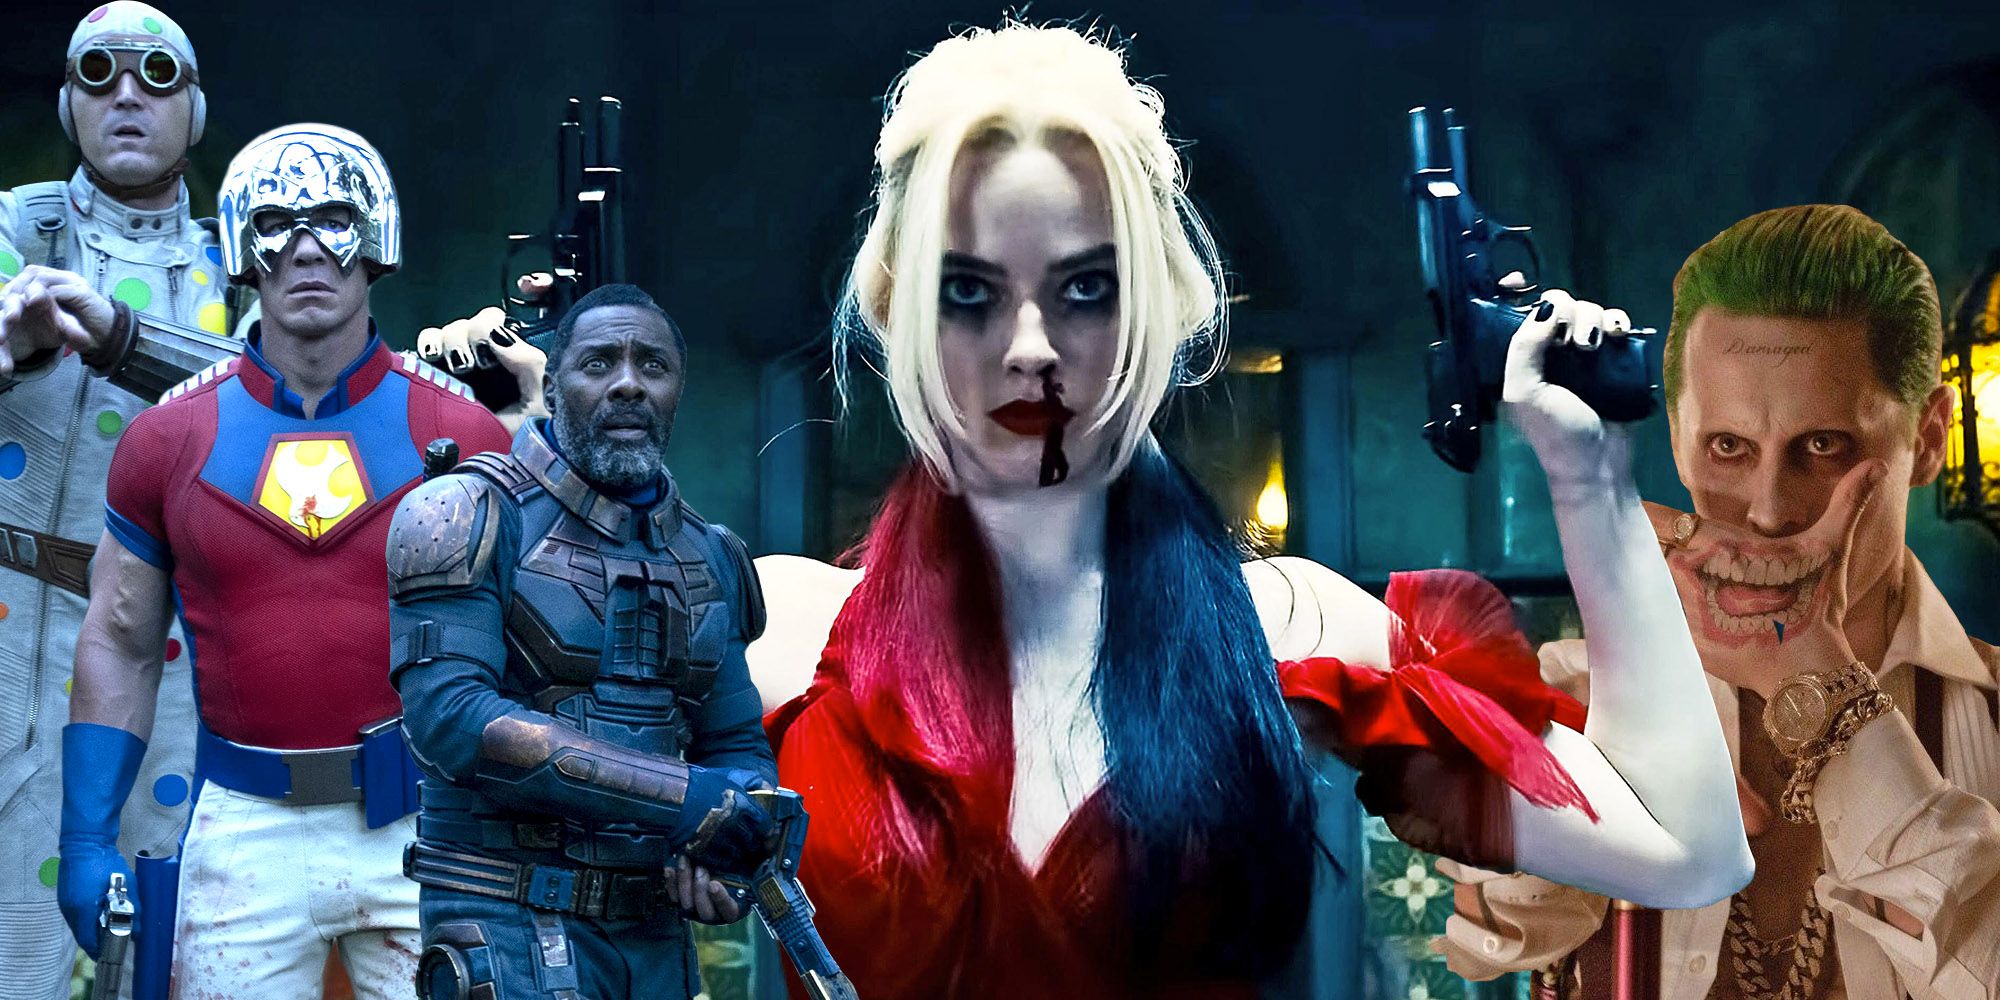 Joker's DCEU Failure Made The Suicide Squad’s Riskiest Bet Pay Off